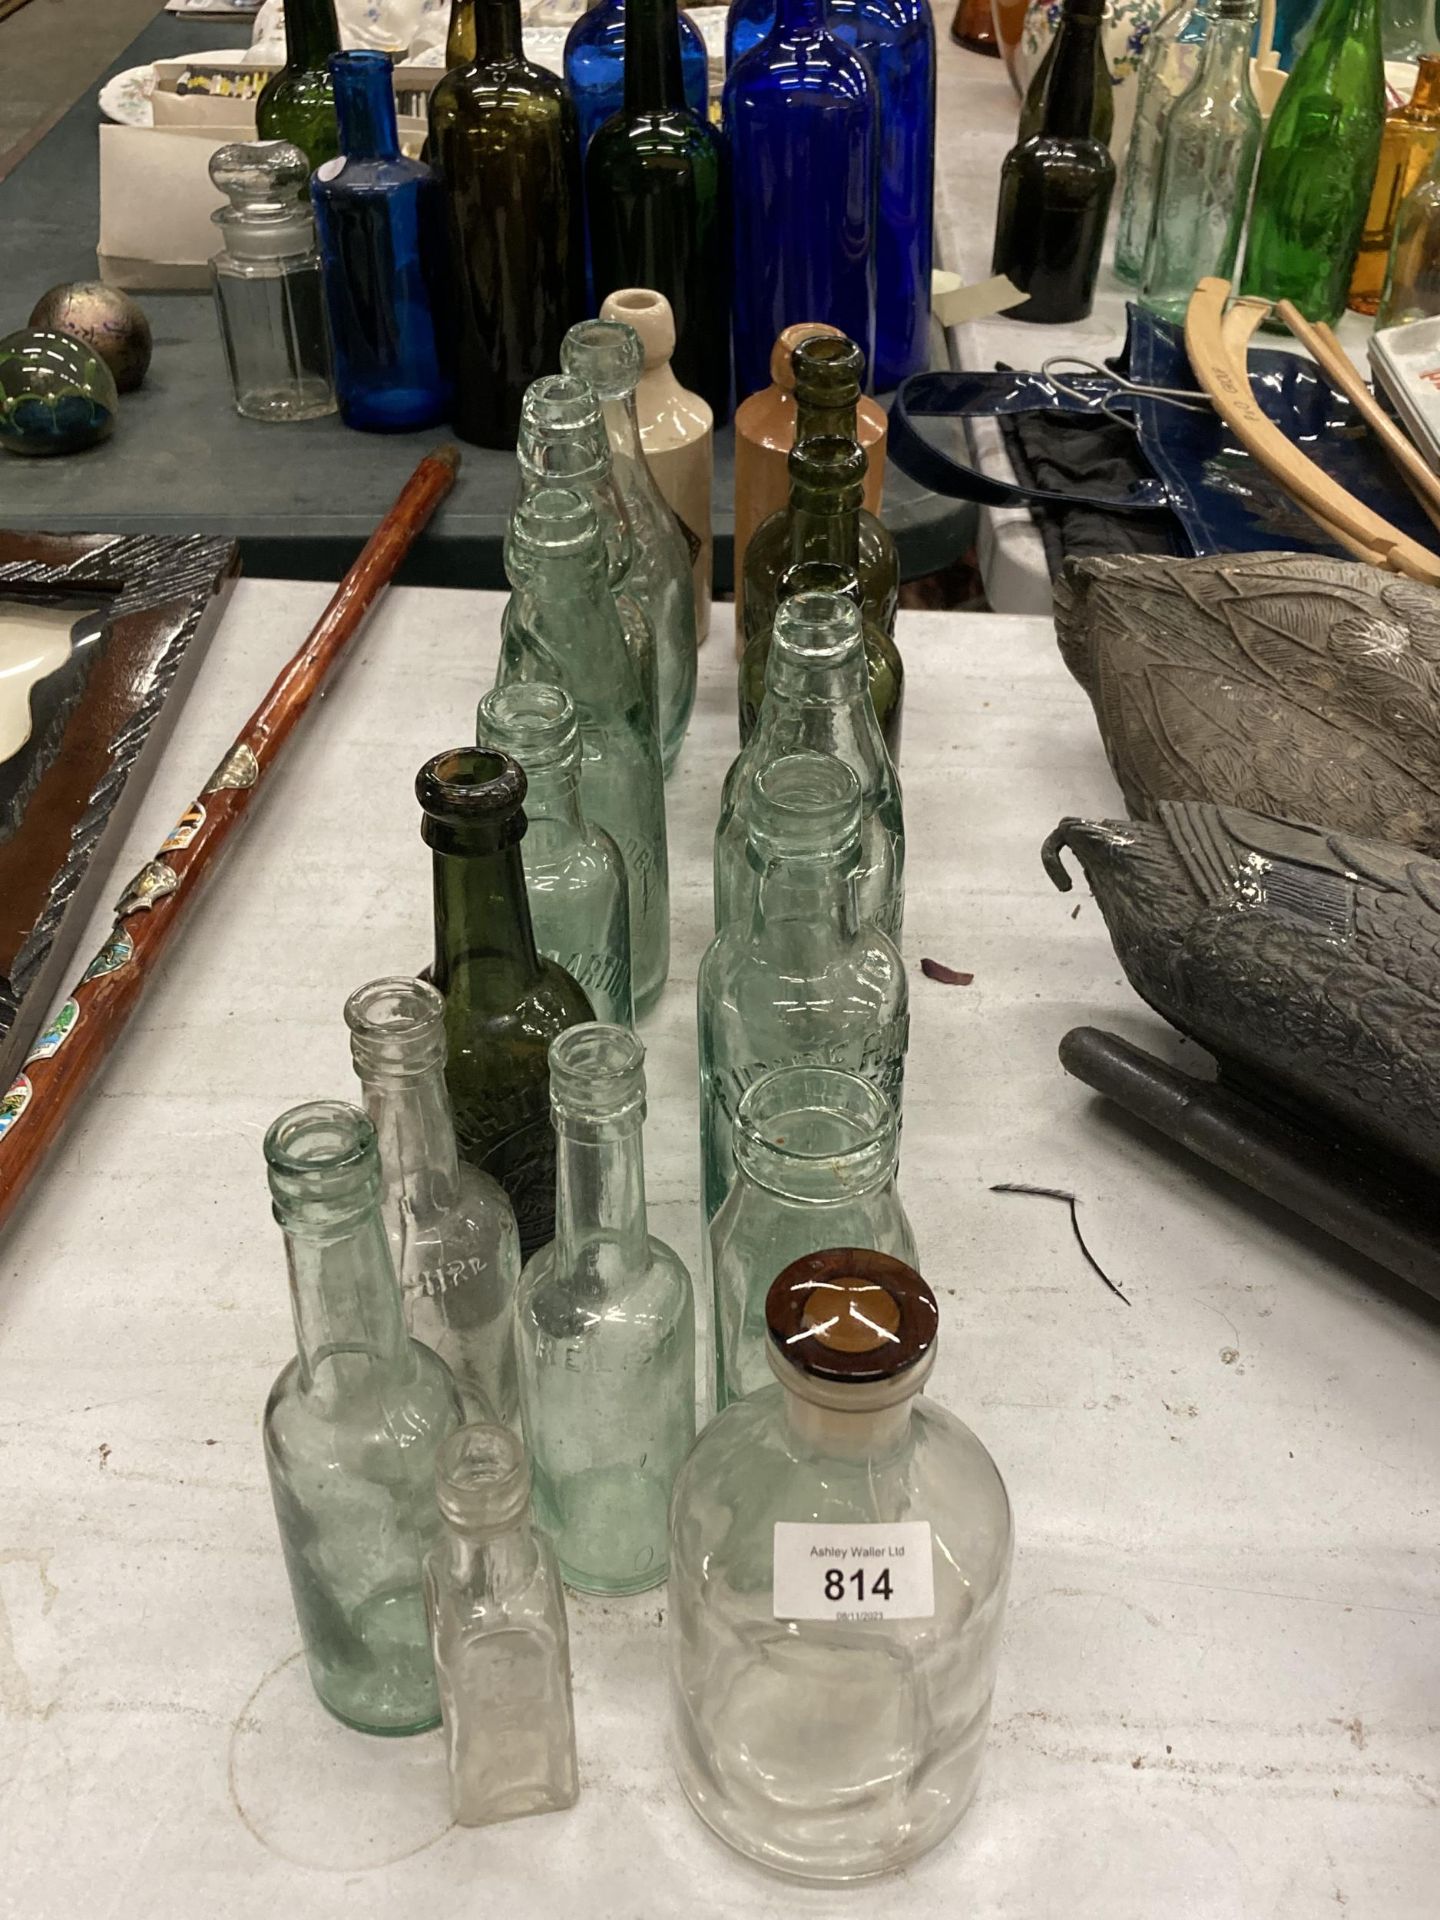 A COLLECTION OF VINTAGE GLASS BOTTLES WITH ADVERTISING ON THEM PLUS TWO STONE ONES